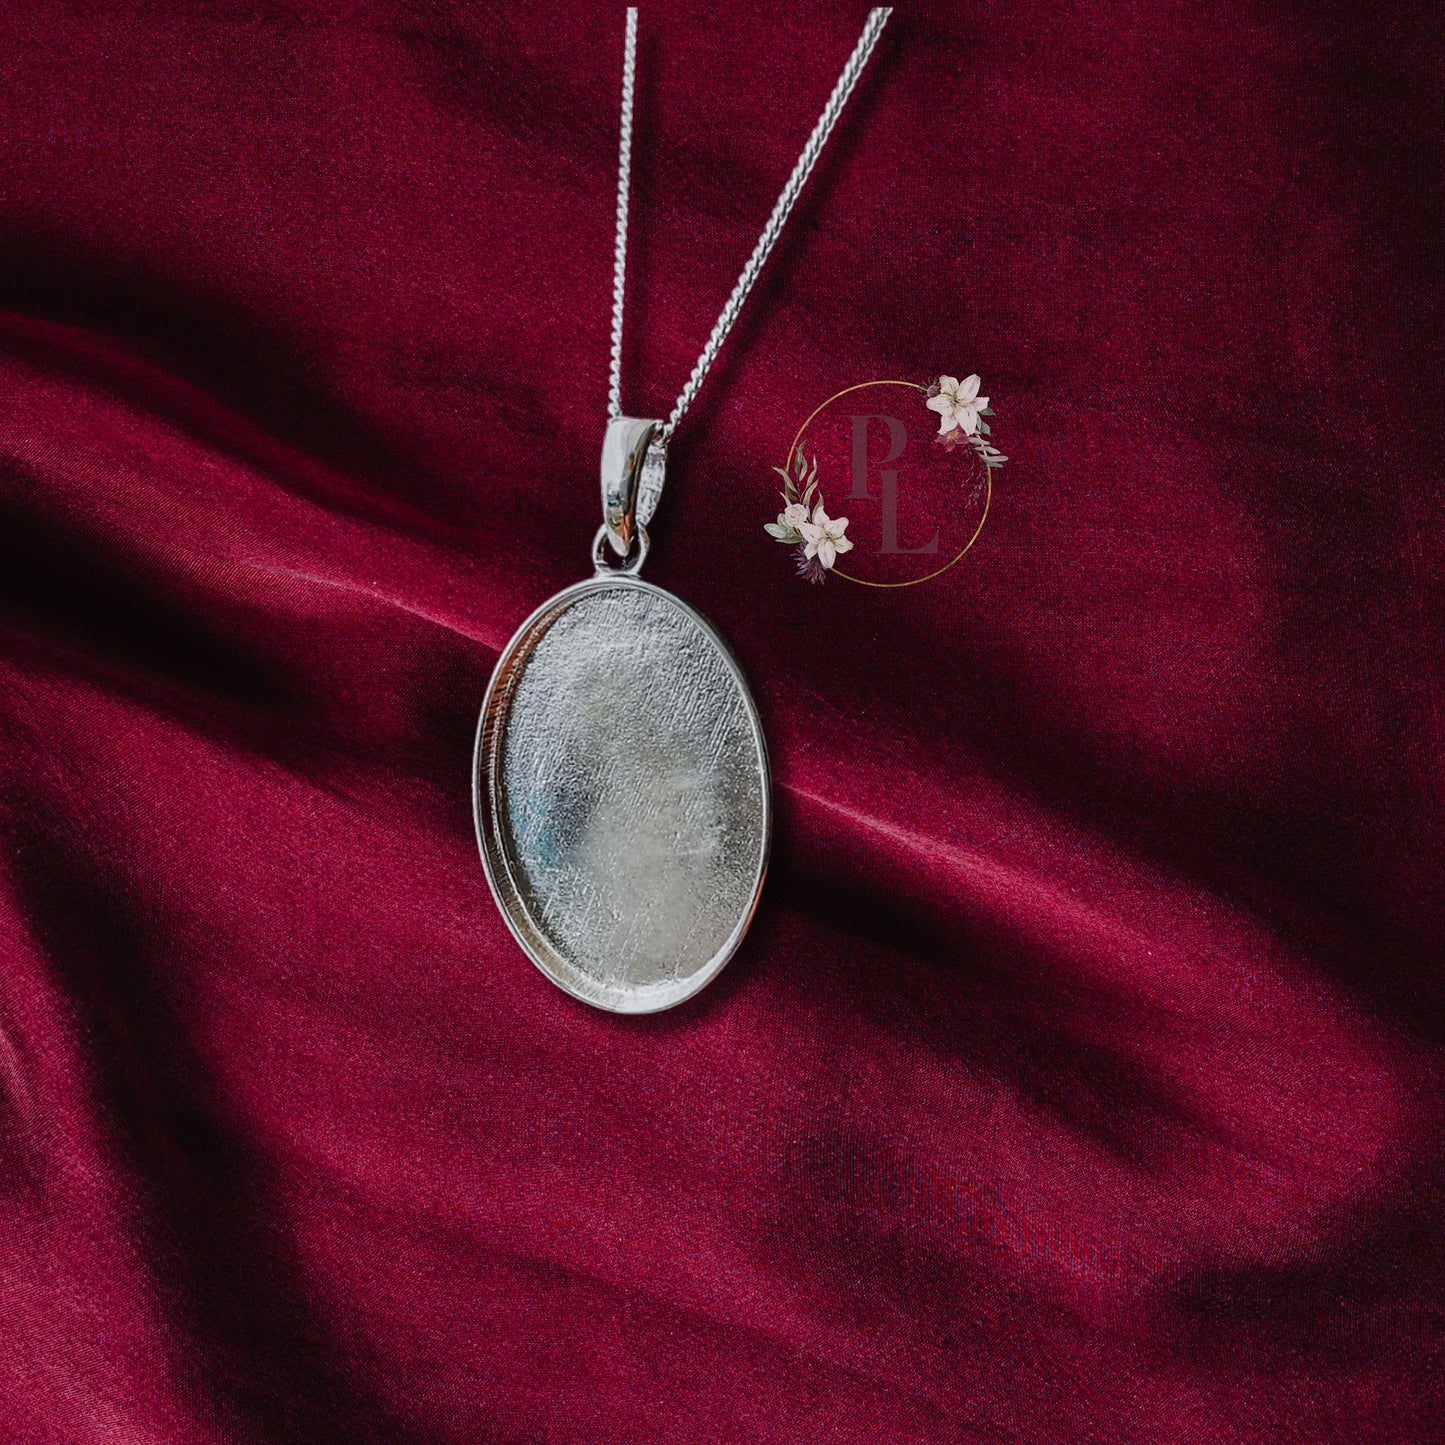 Janie - Oval Cremation Ash Necklace